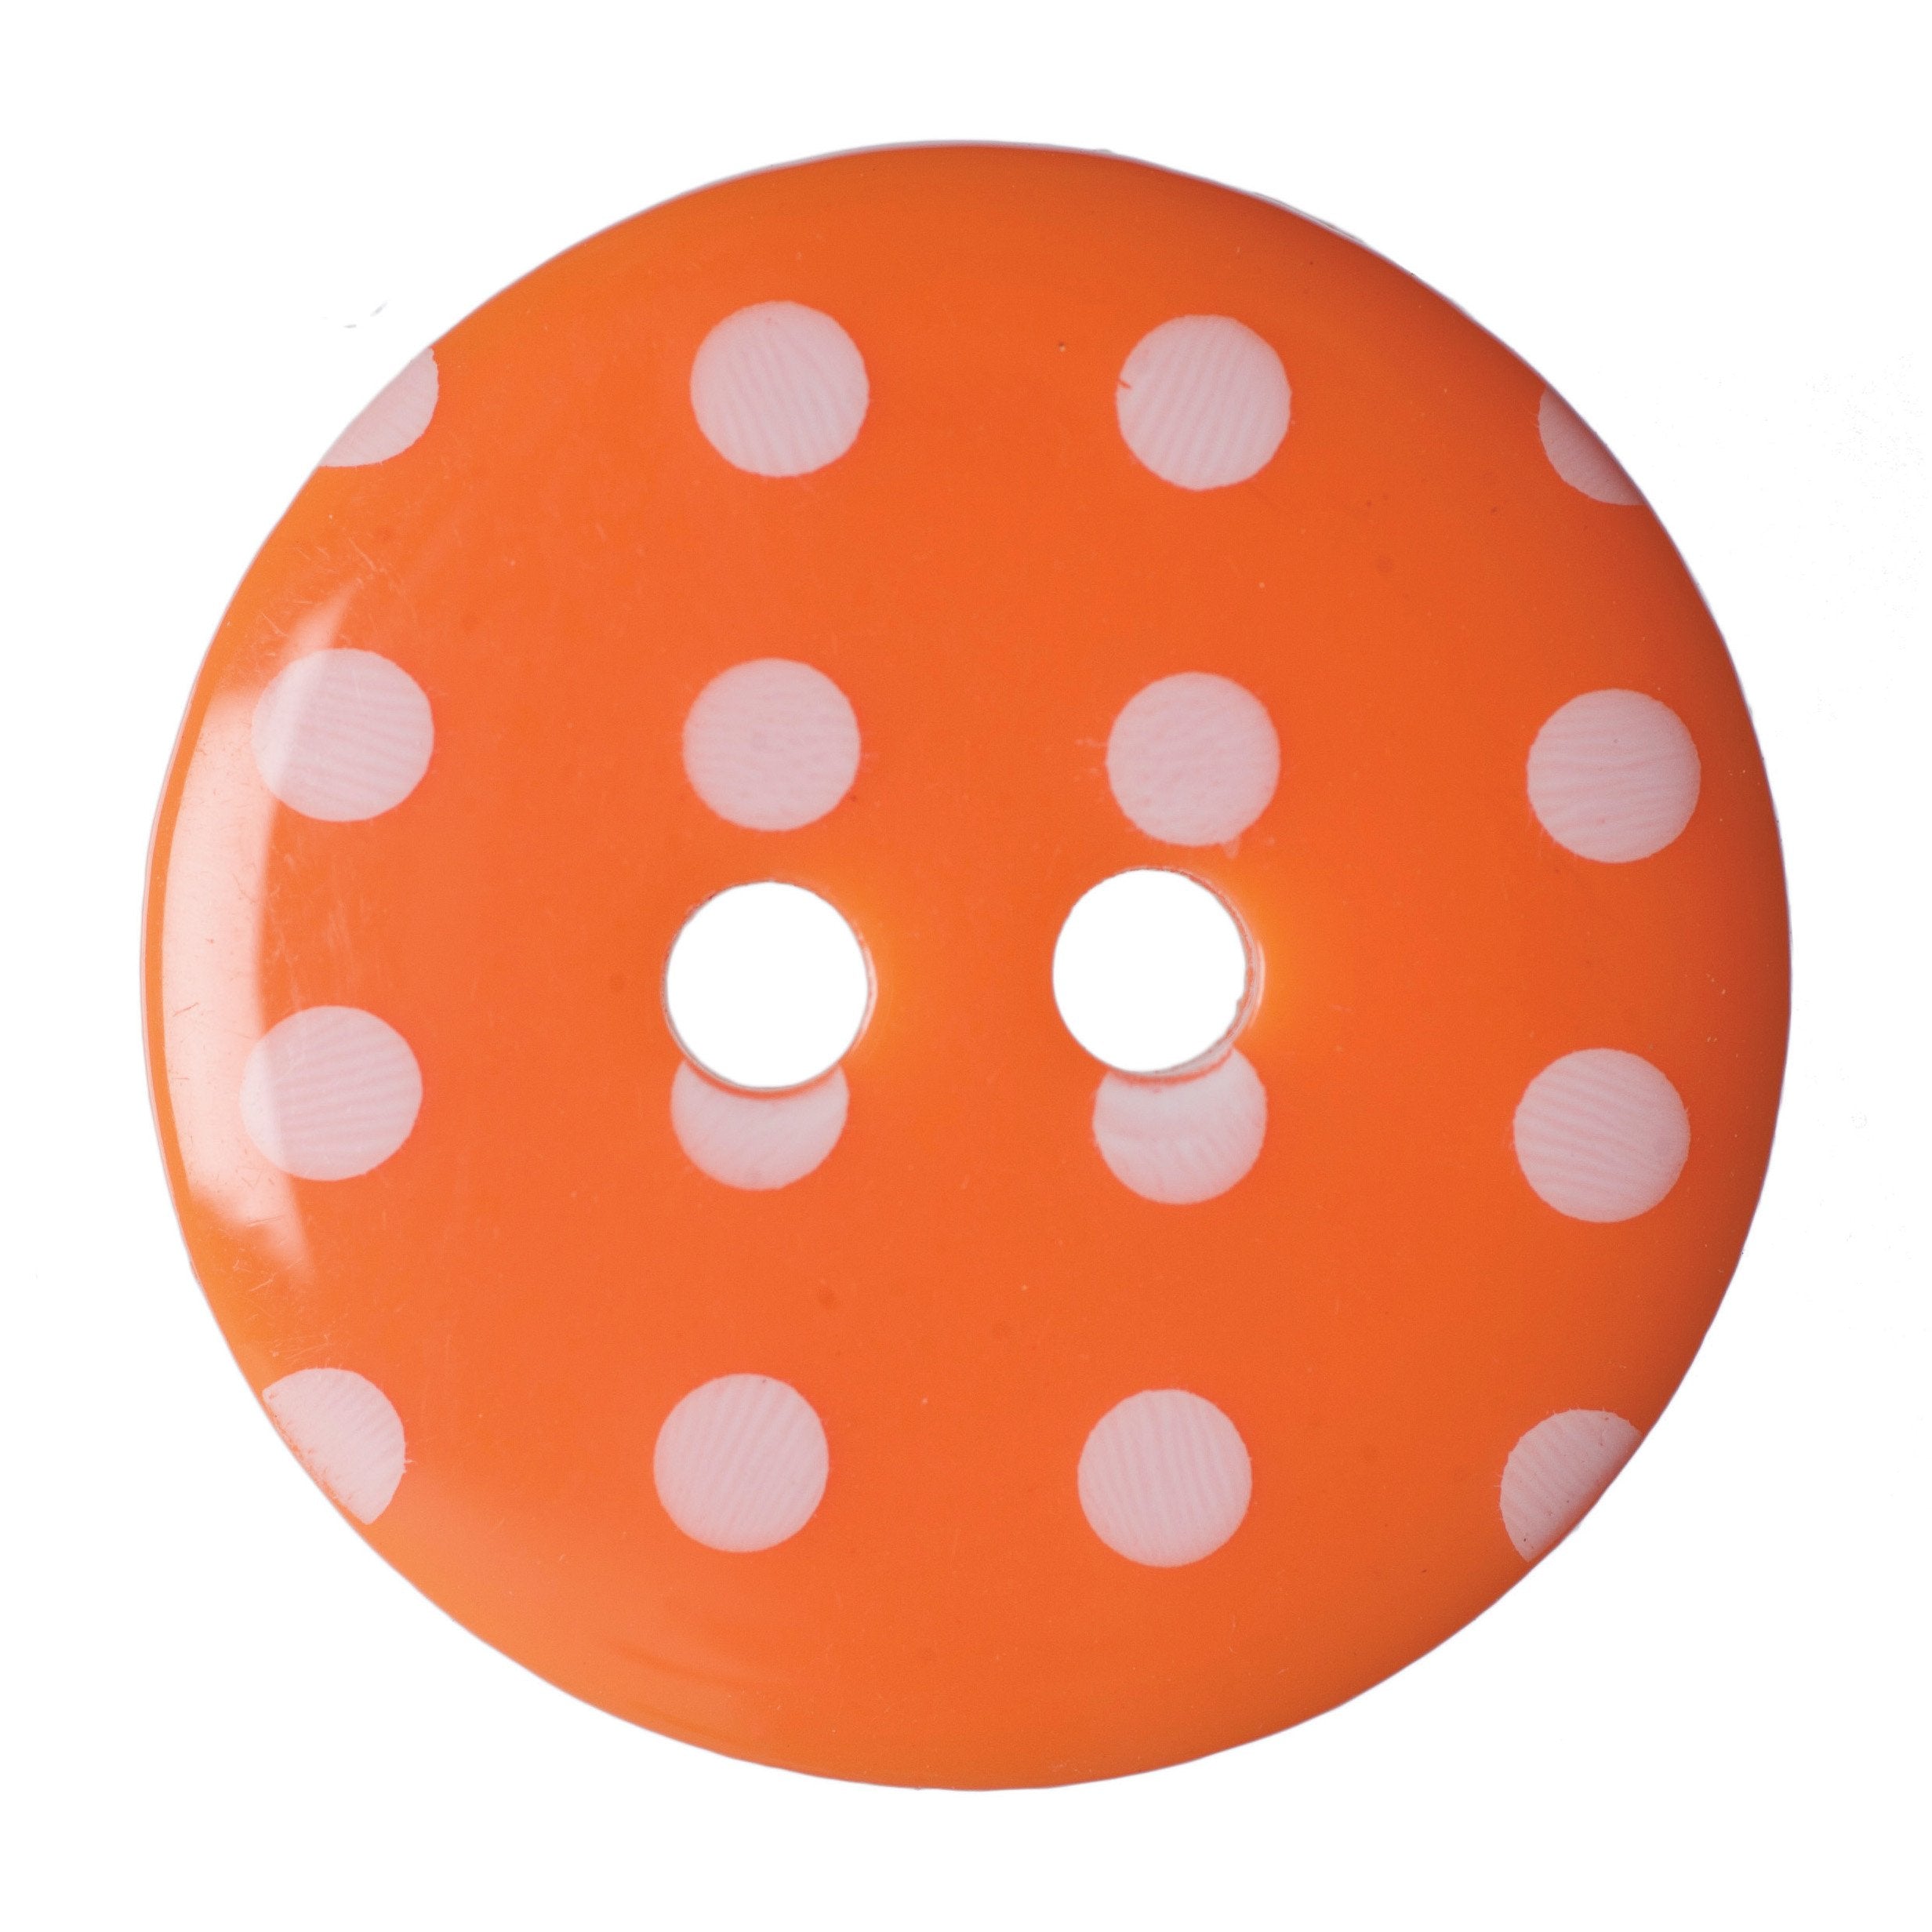 Orange Buttons with polka dots from Jaycotts Sewing Supplies